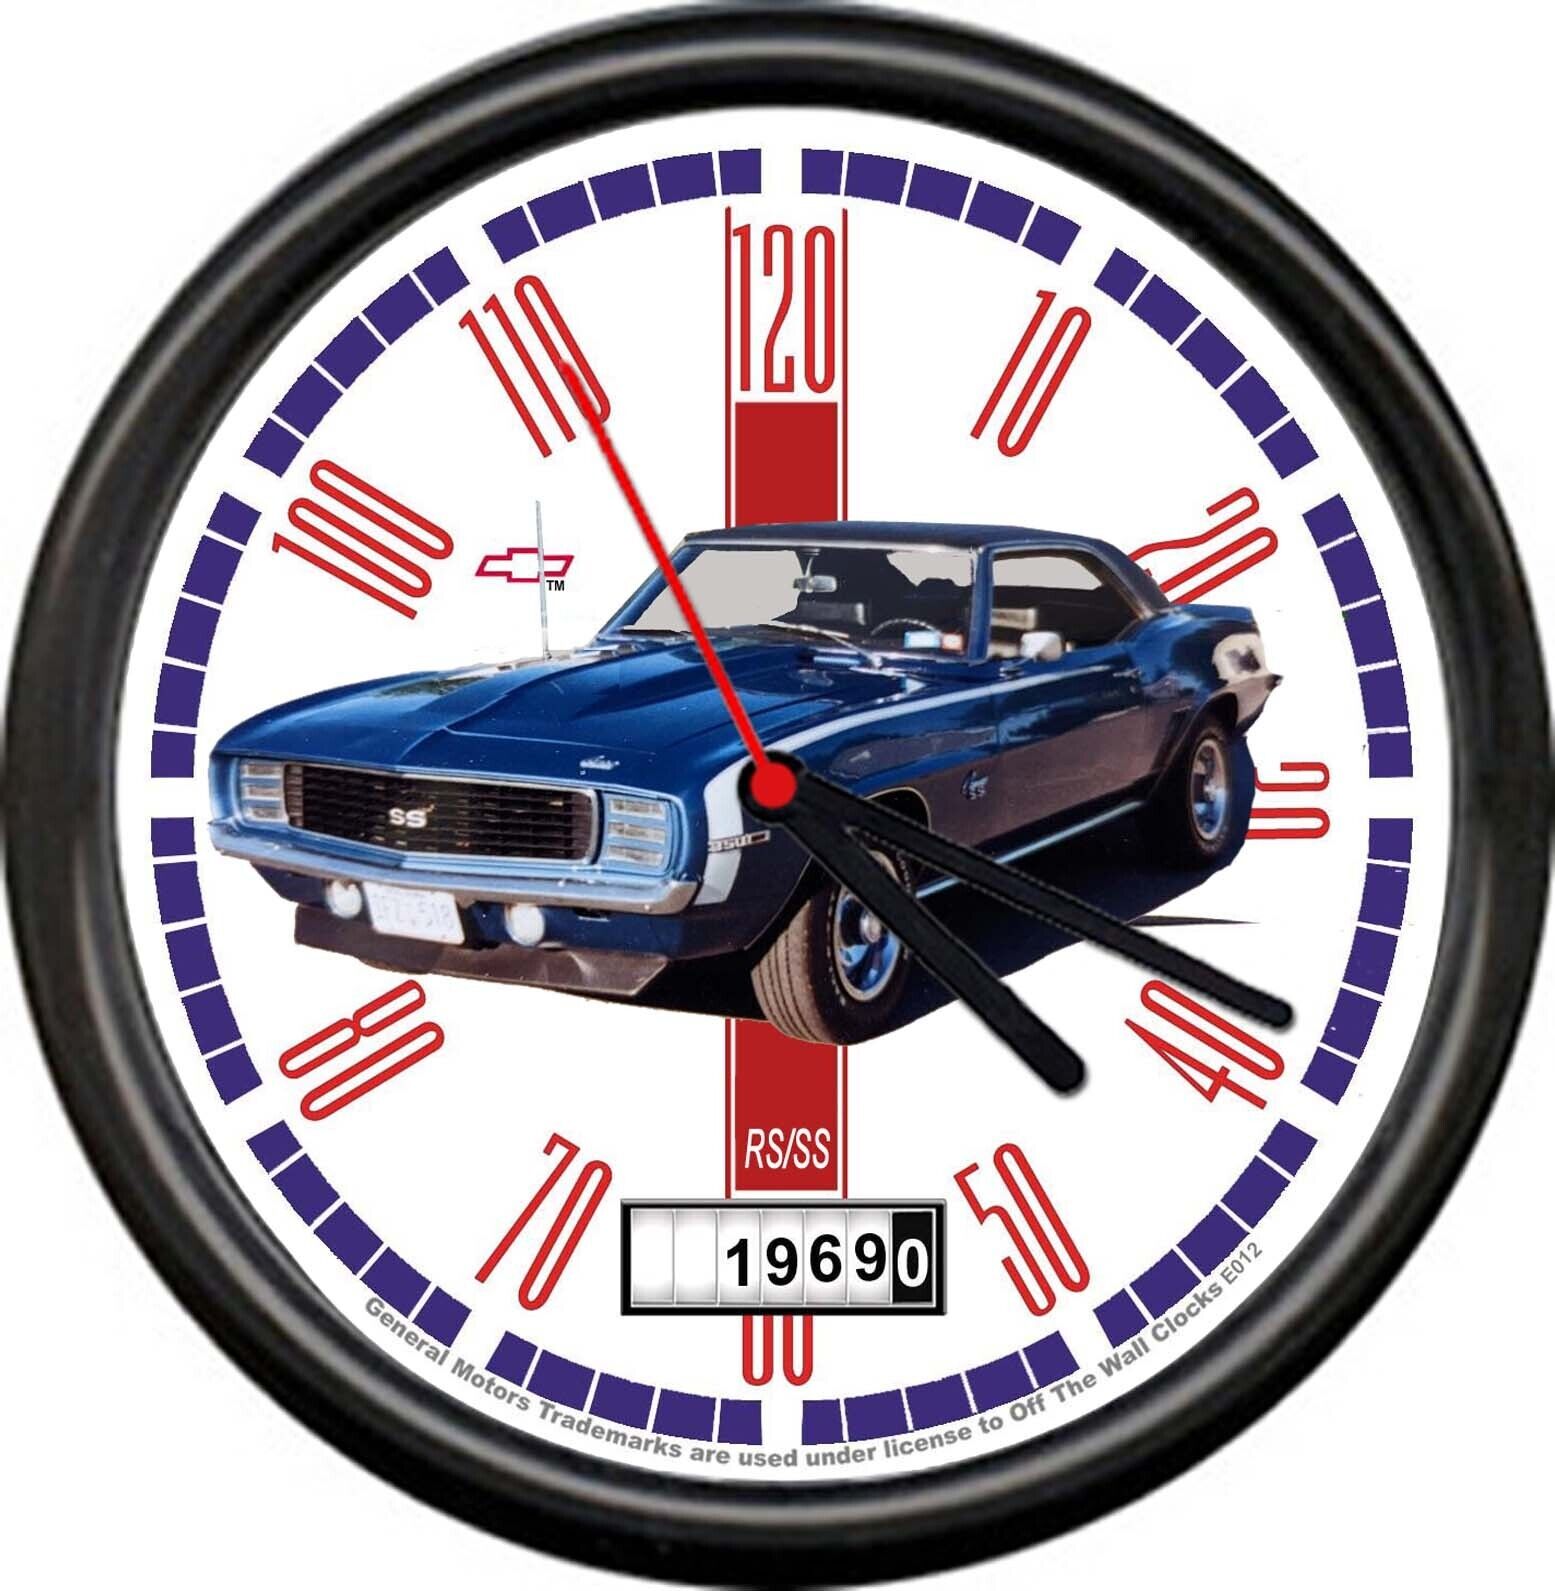 Licensed 1969 Camaro Z28 RS/SS Blue Muscle Car General Motors Sign Wall Clock